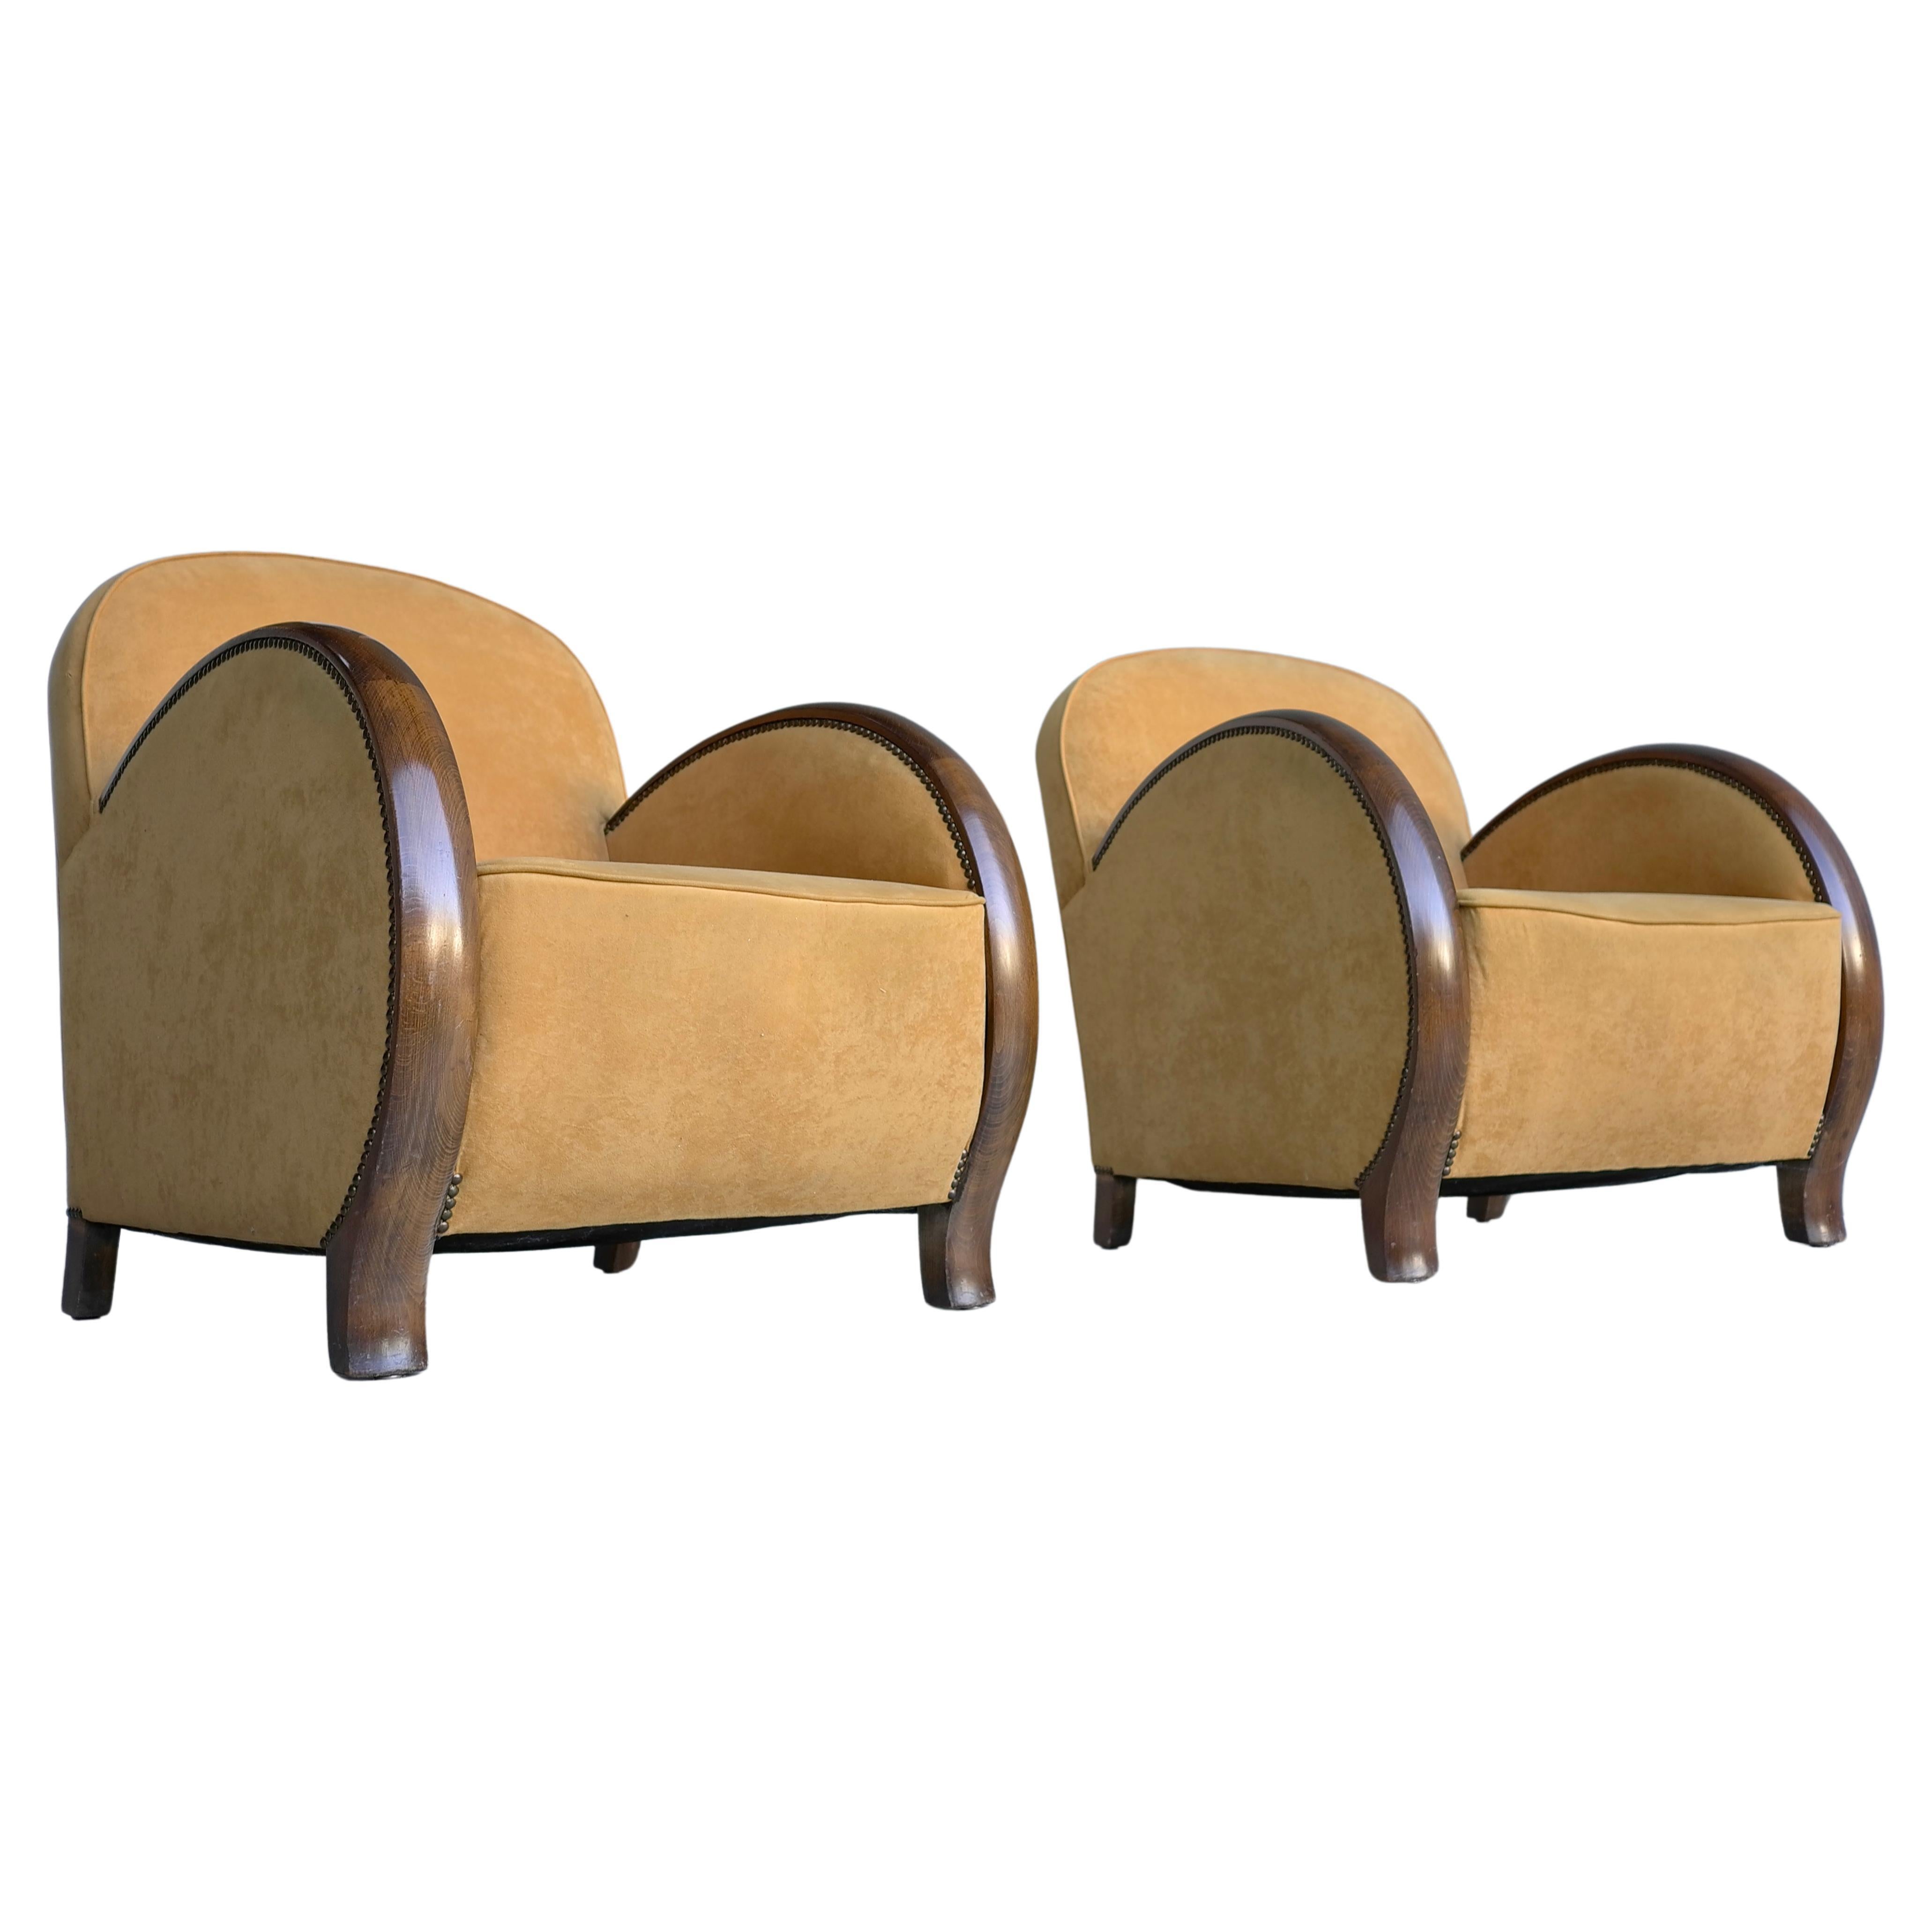 Pair of Art Deco Streamlined Armchairs in yellow Velvet with Wooden arms 1930's For Sale 9